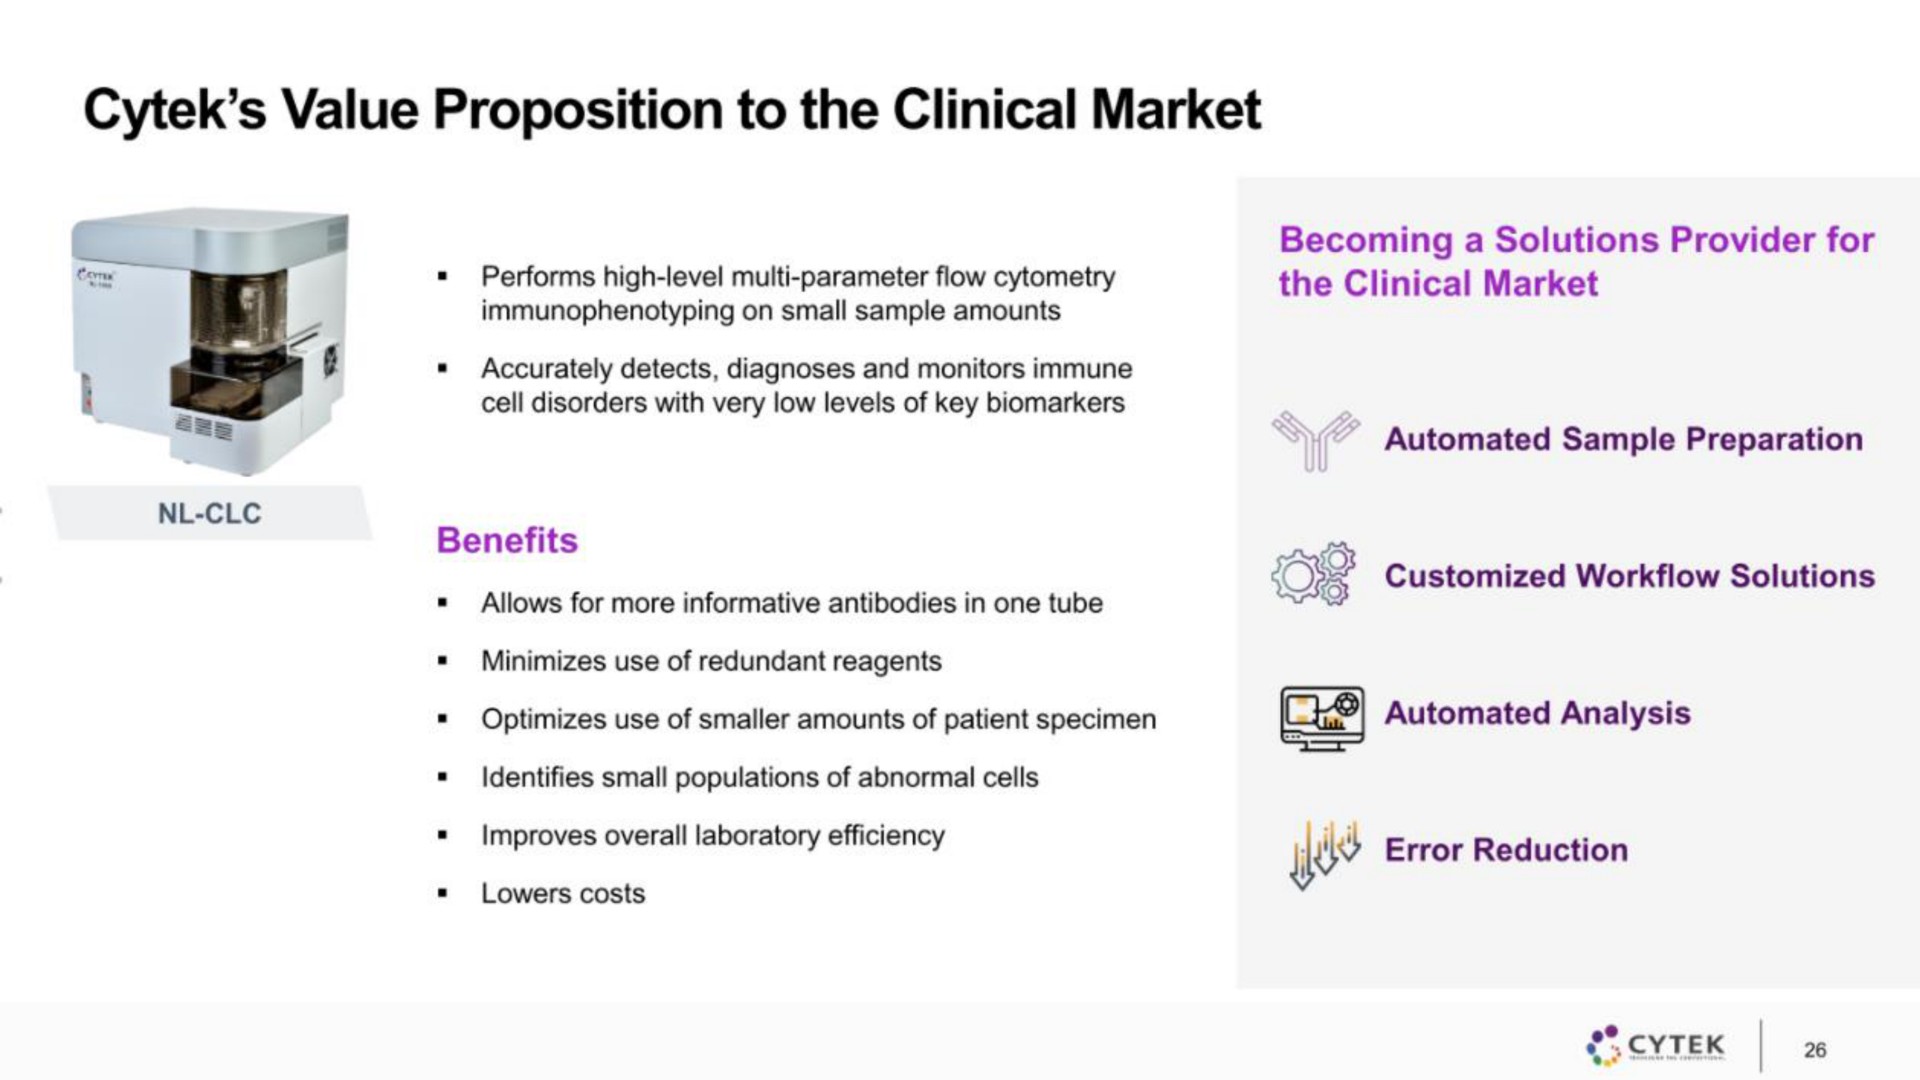 value proposition to the clinical market | Cytek